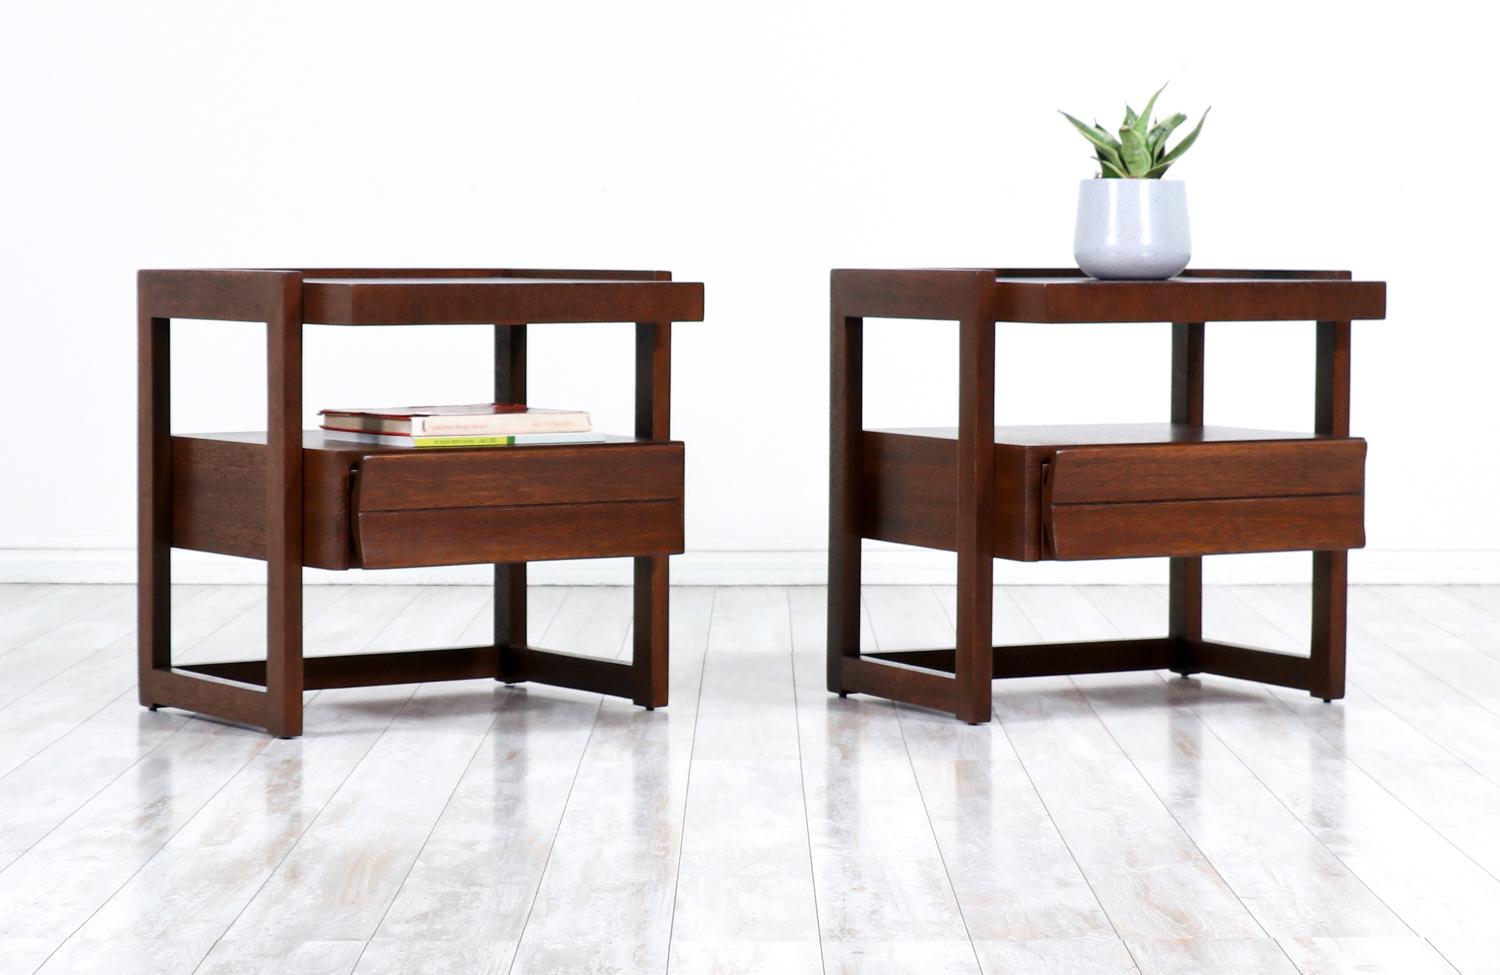 Paul Laszlo two-tier mahogany night stands for Brown Saltman.